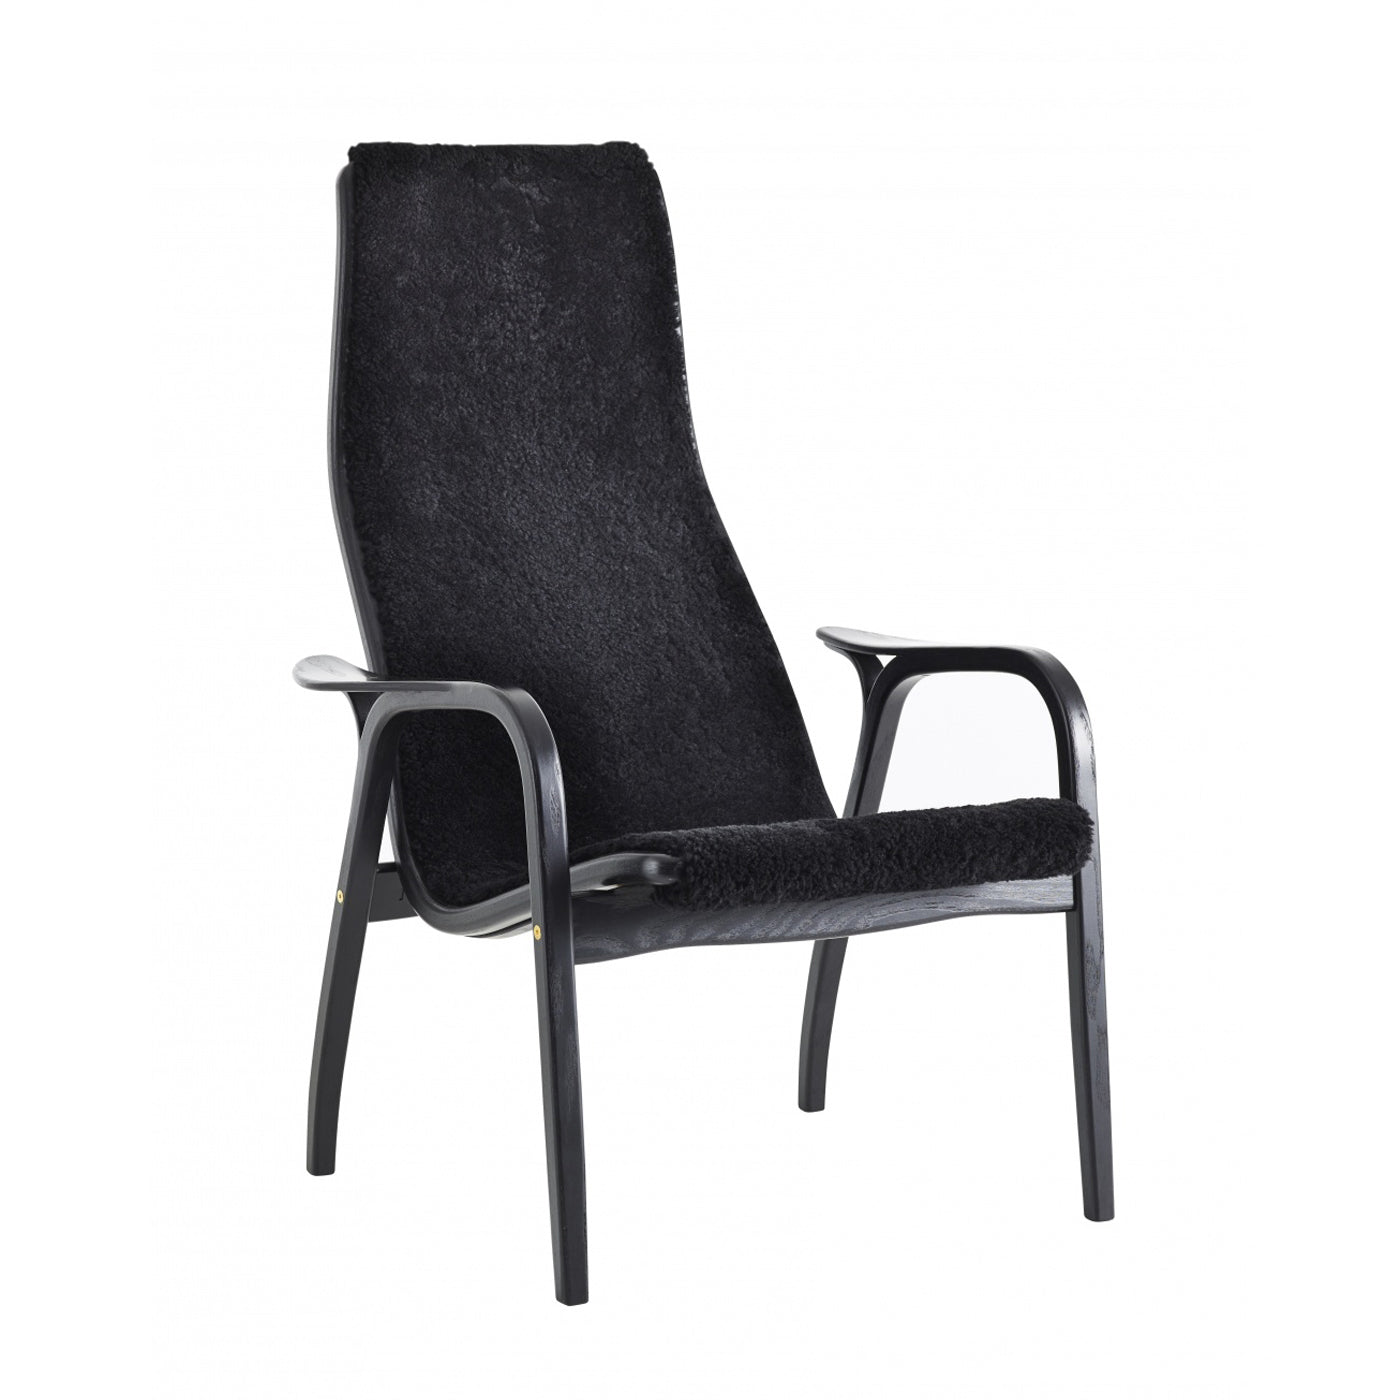 Lamino Easy Chair Black, Swedese